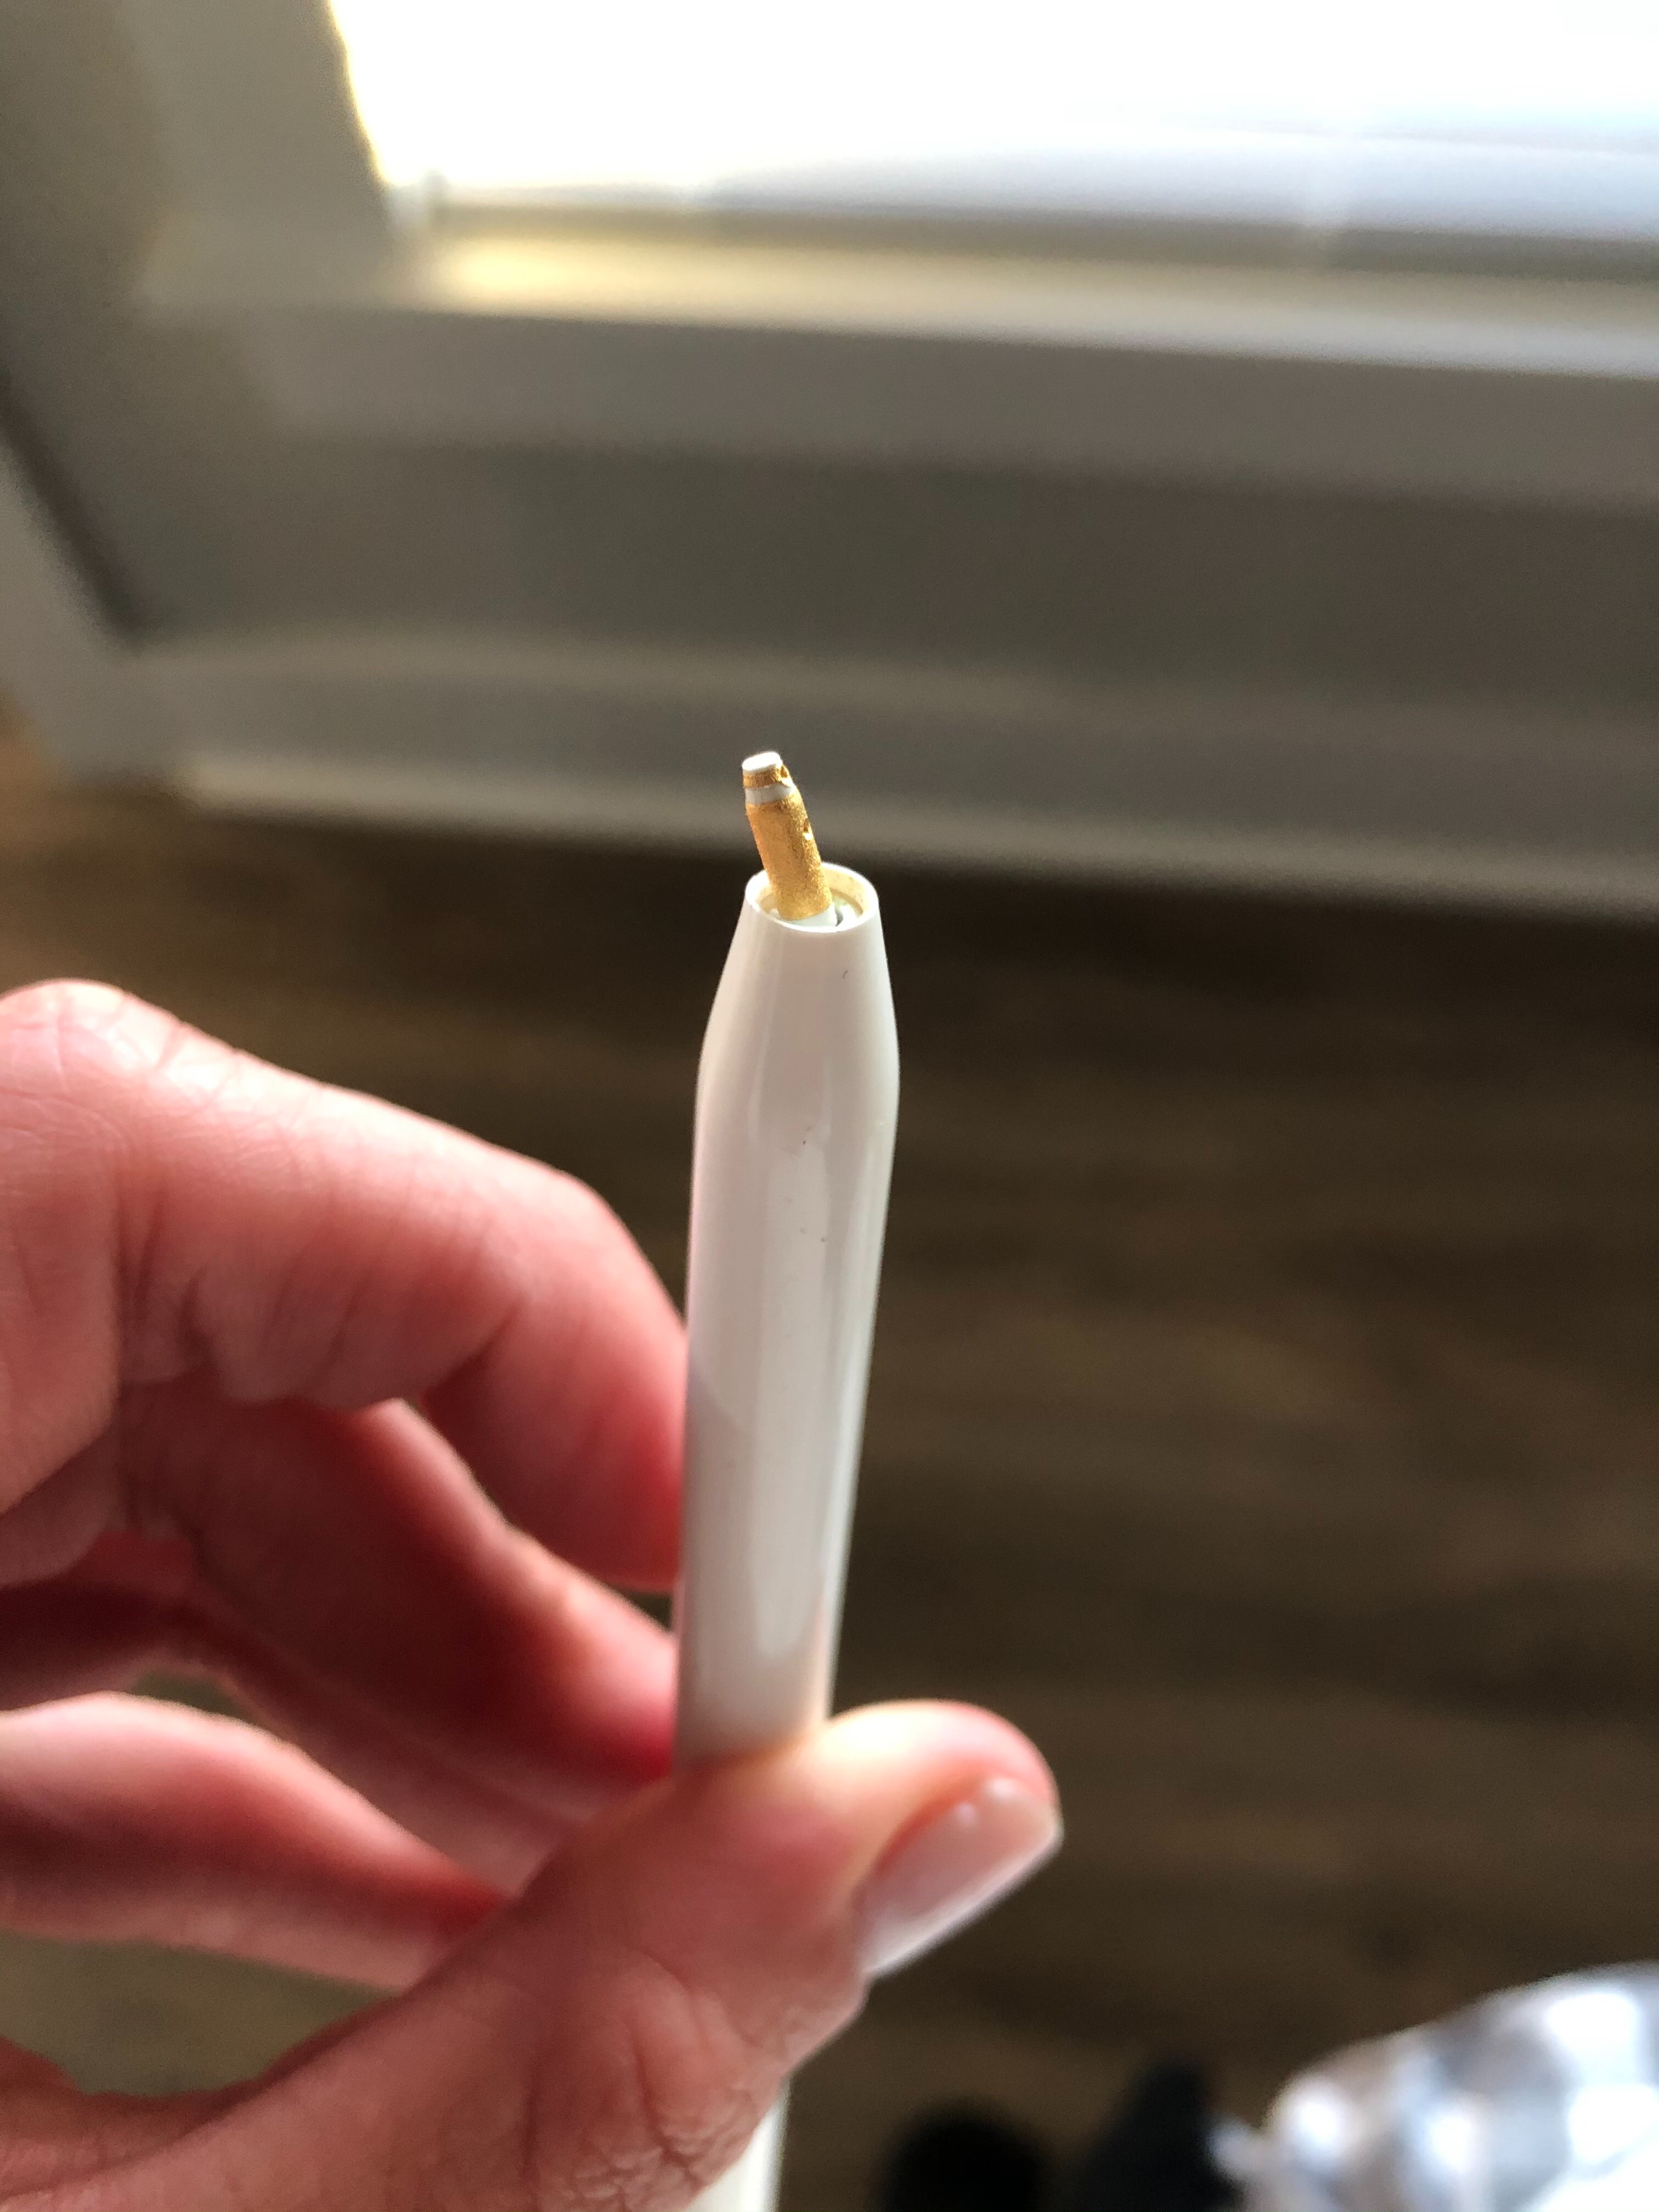 How do I know if my Apple Pencil is damaged?